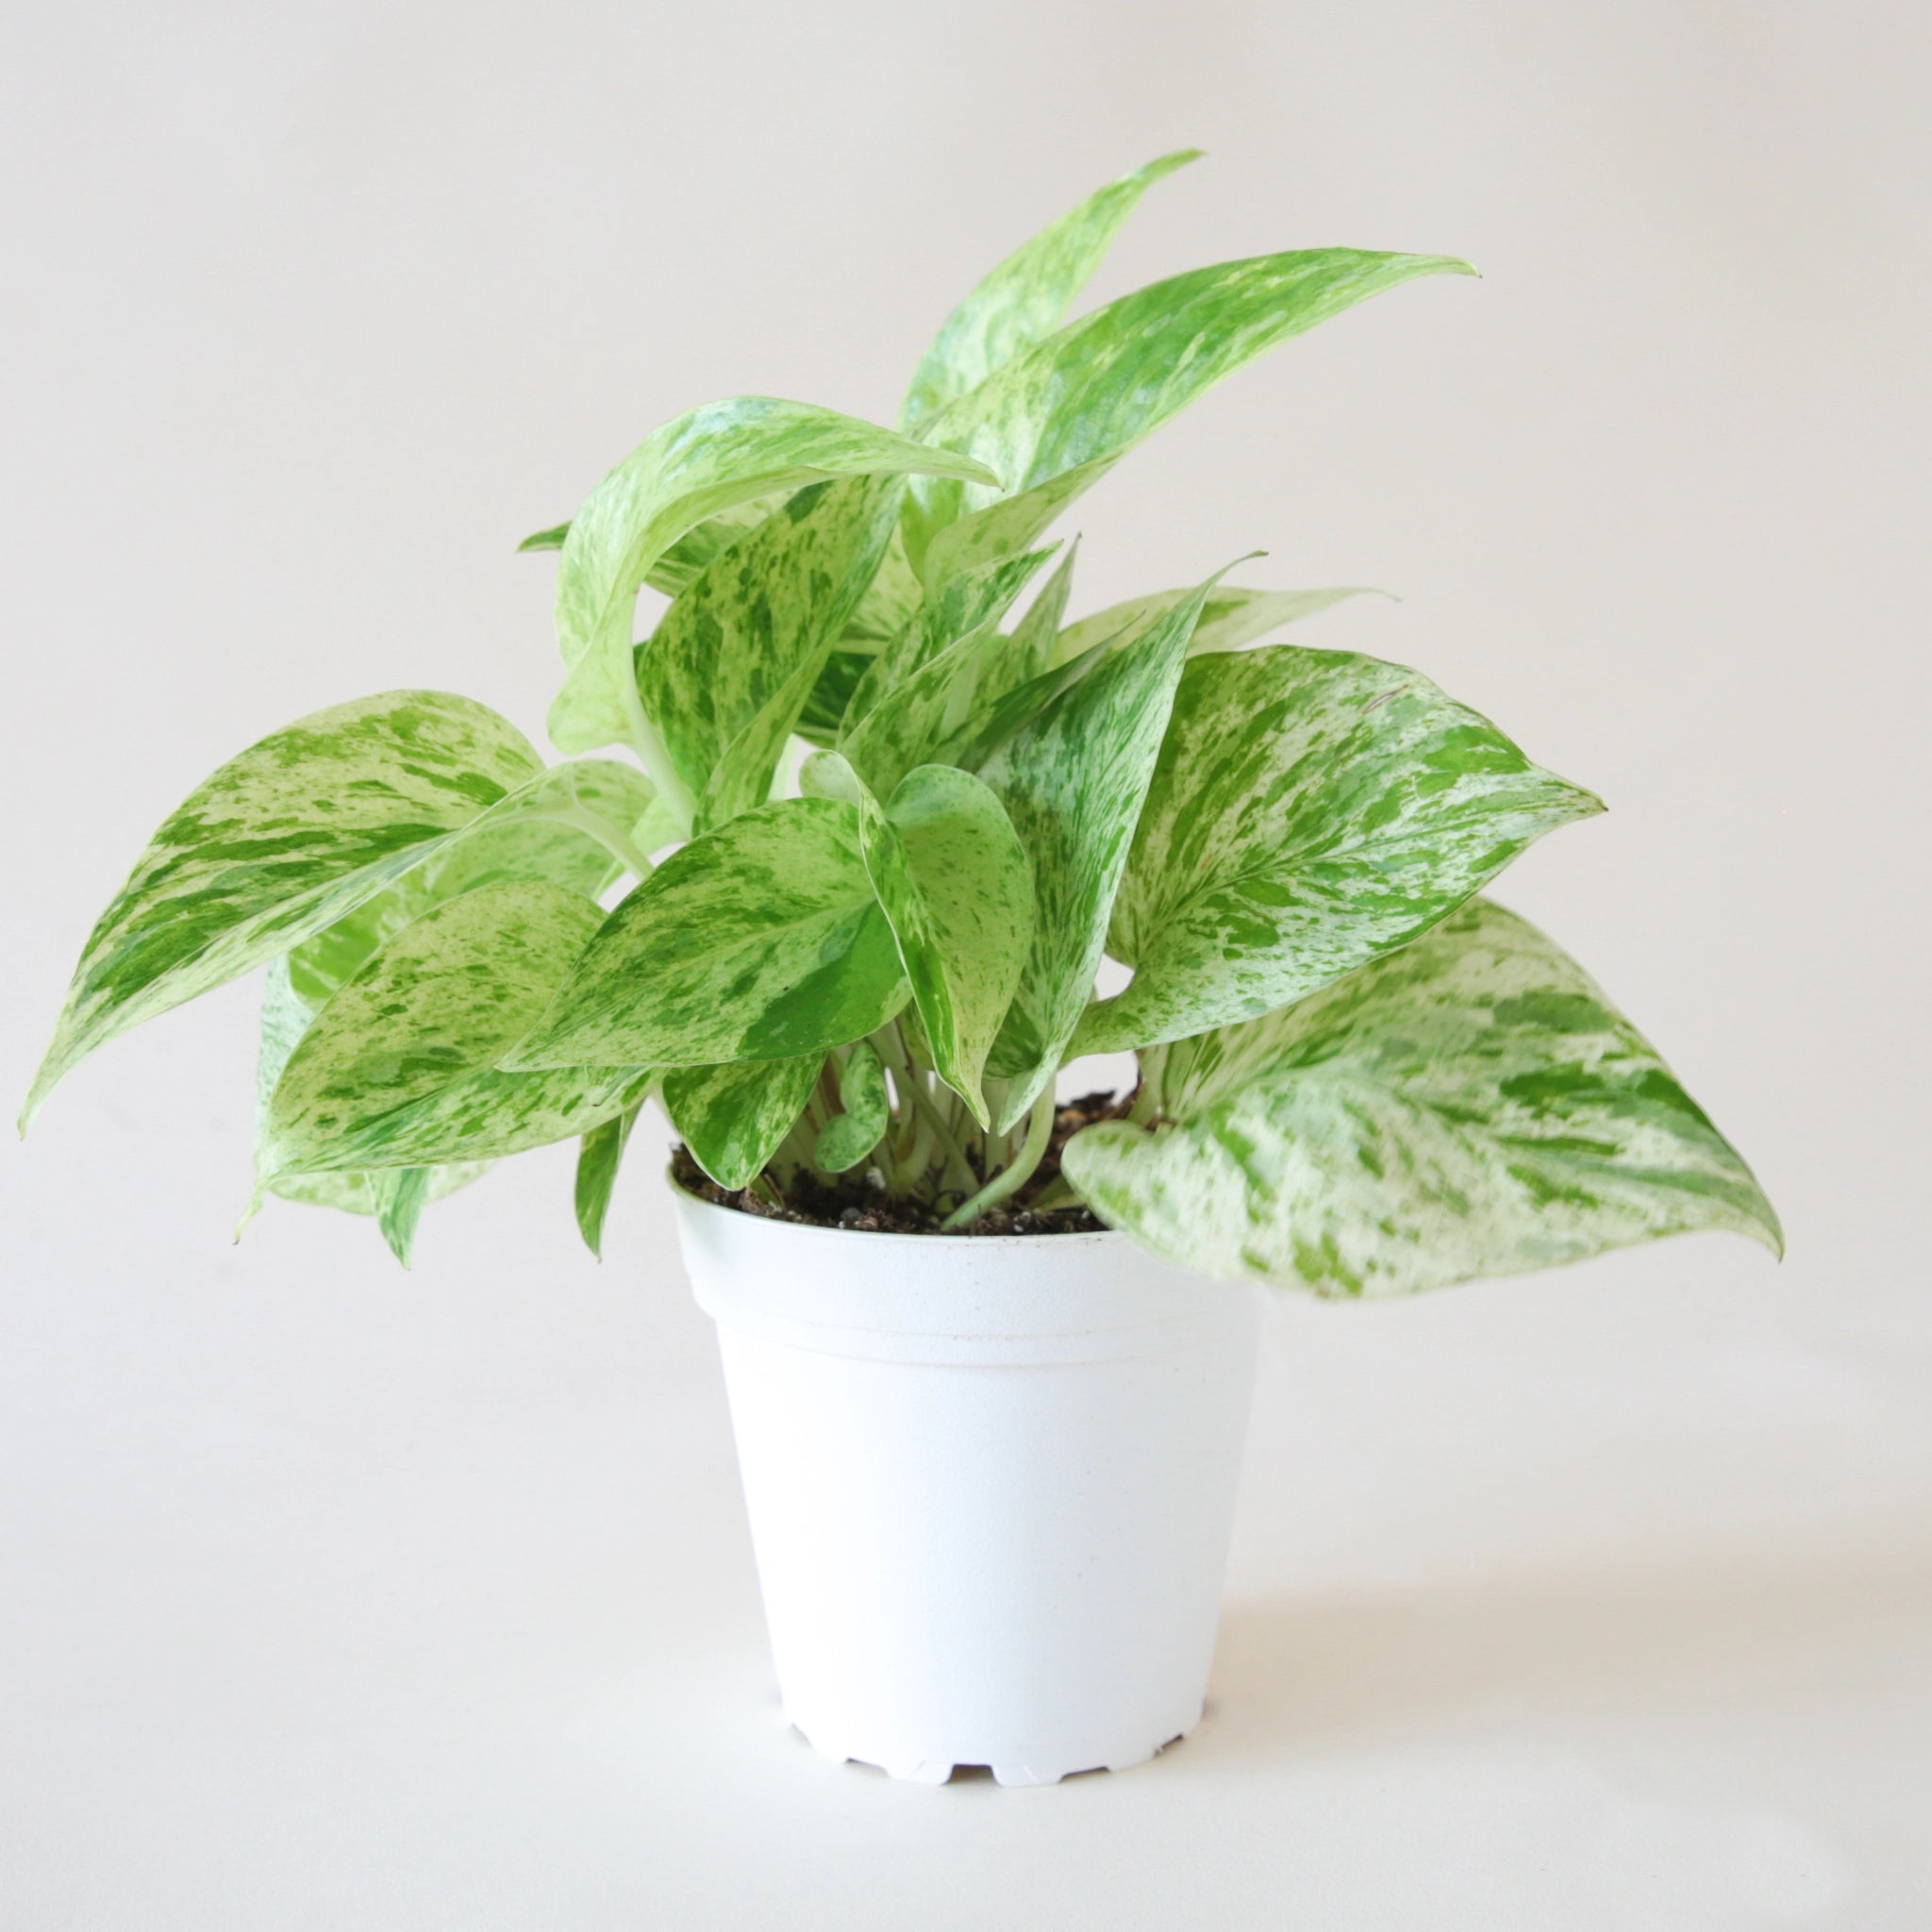 pothos marble queen sits in a small white pot